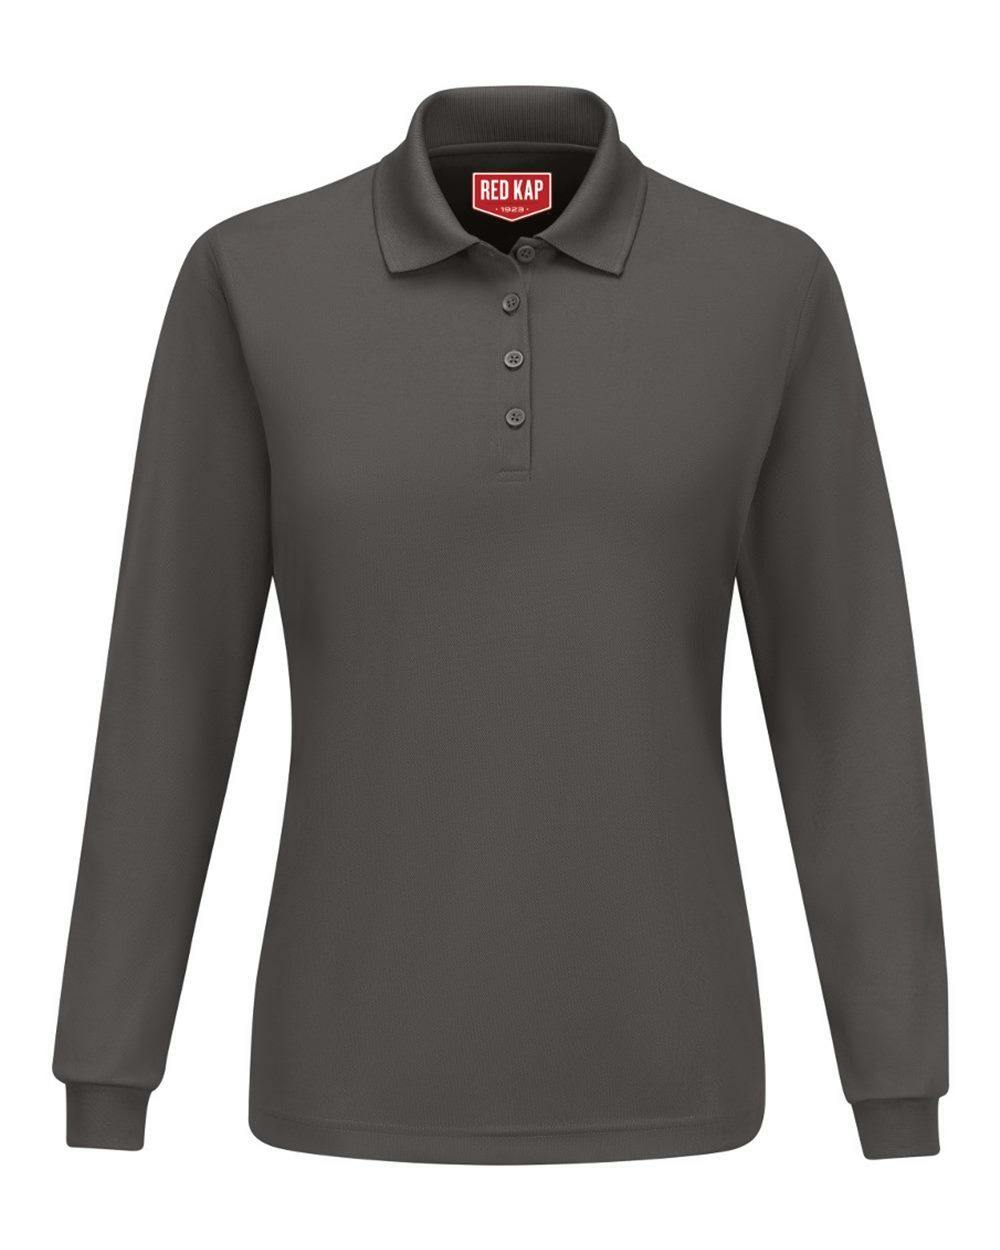 Image for Women's Long Sleeve Performance Knit Polo - SK7L